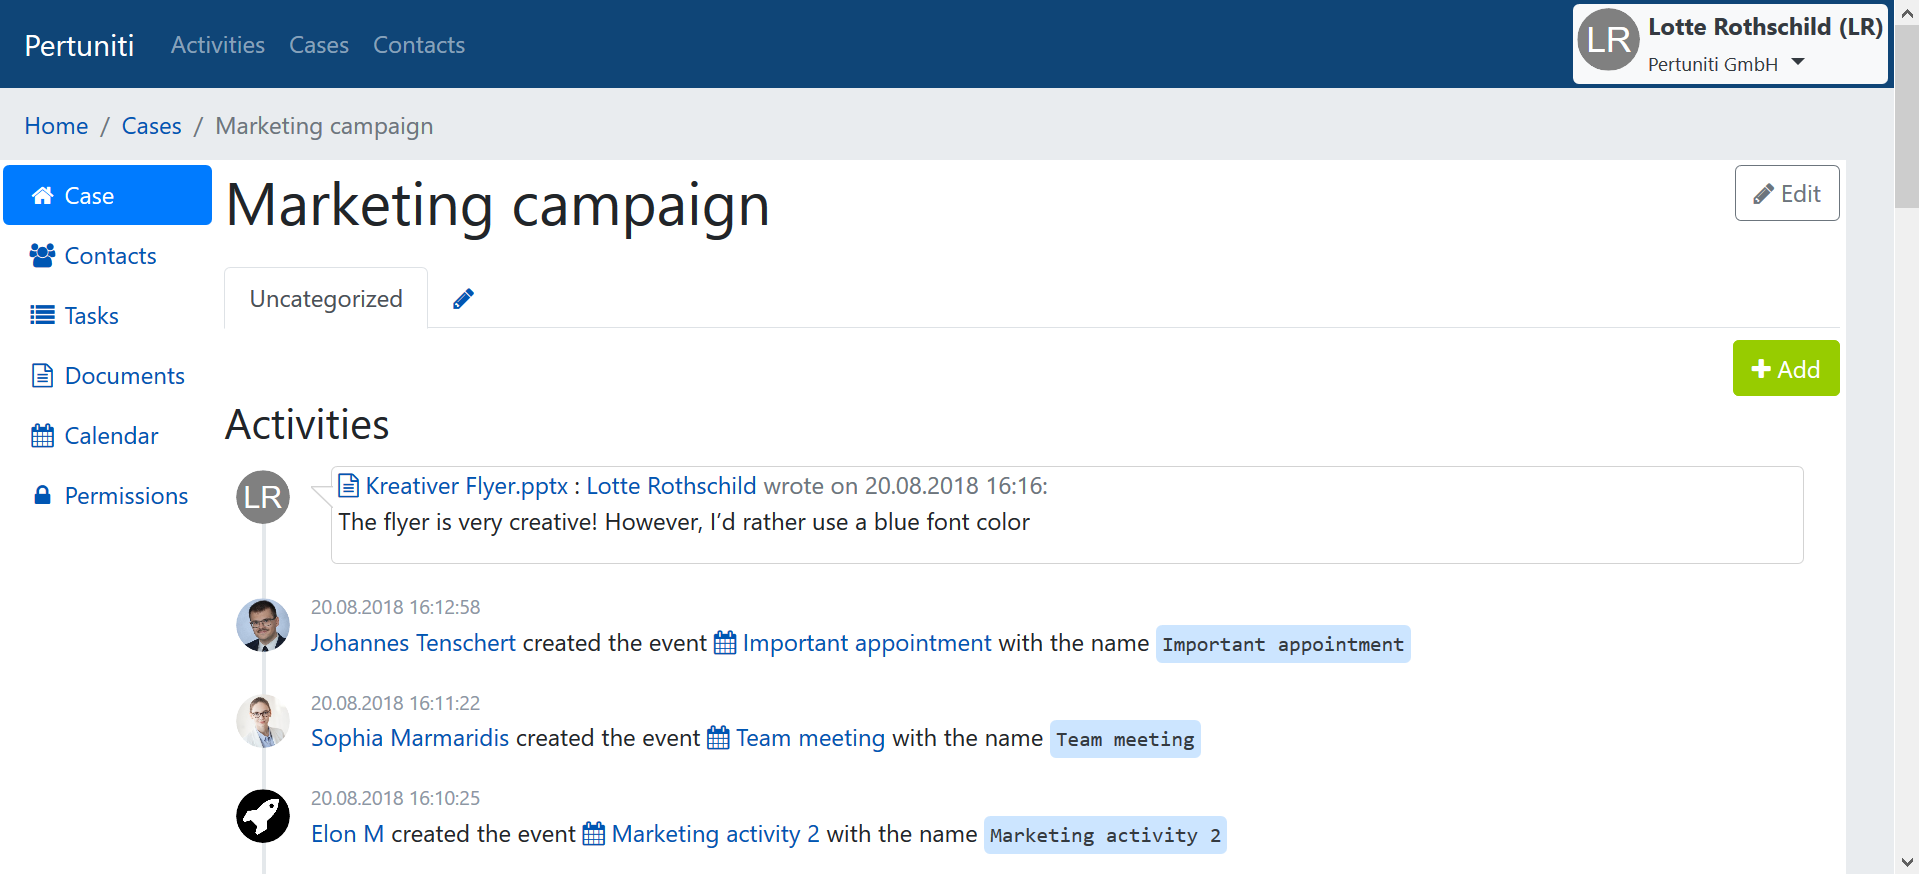 You want to know what your colleagues have been working on? You can comprehend changes and the progress of your campaign via the activity stream.